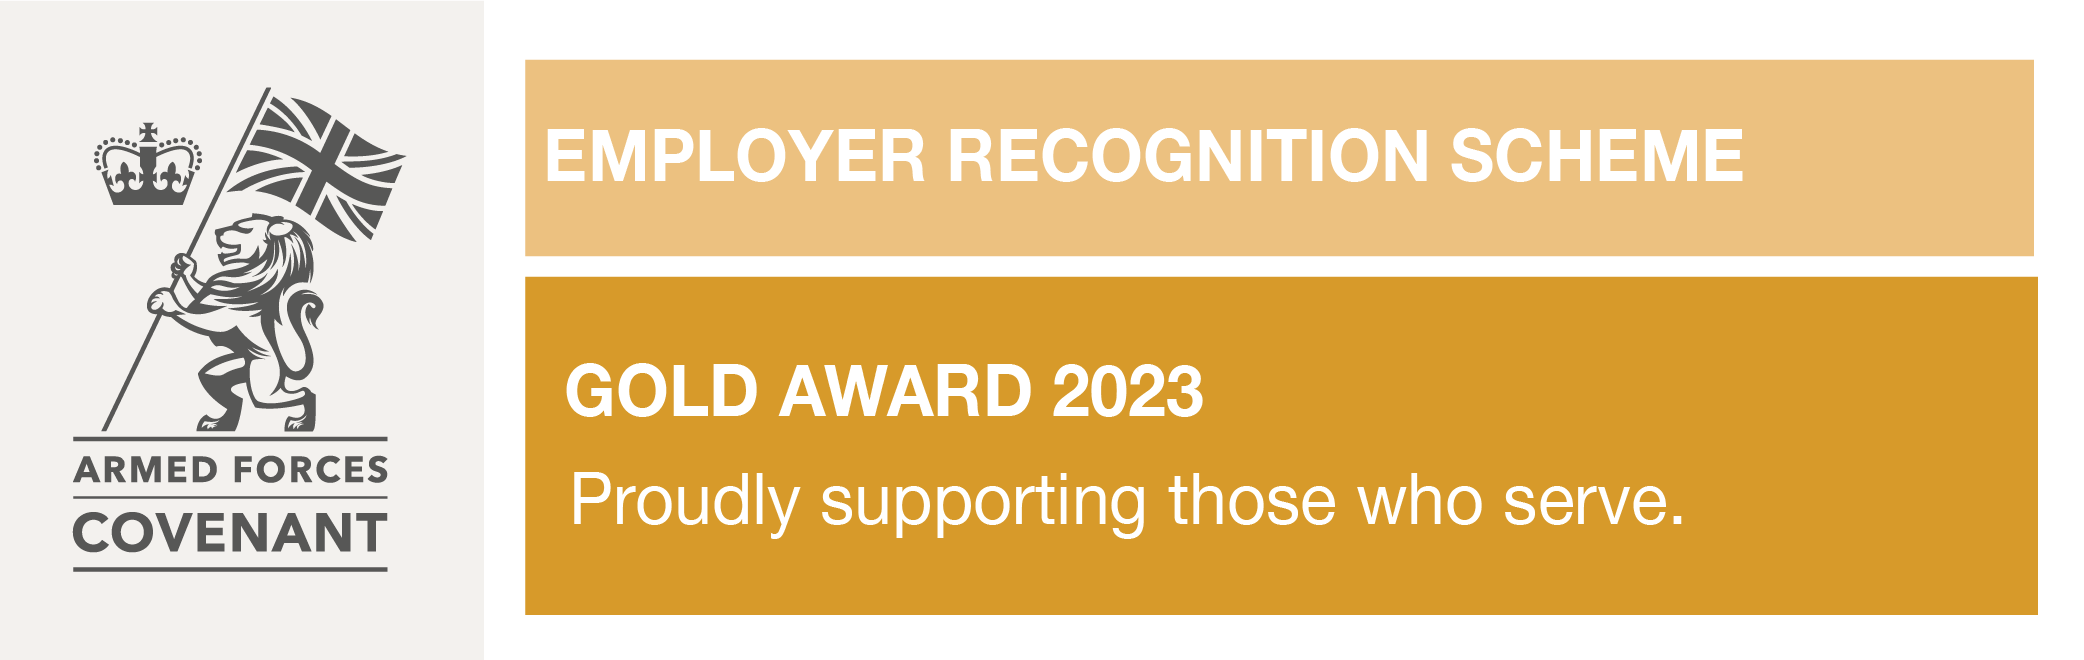 Armed forces covenant employer recognition scheme silver award logo